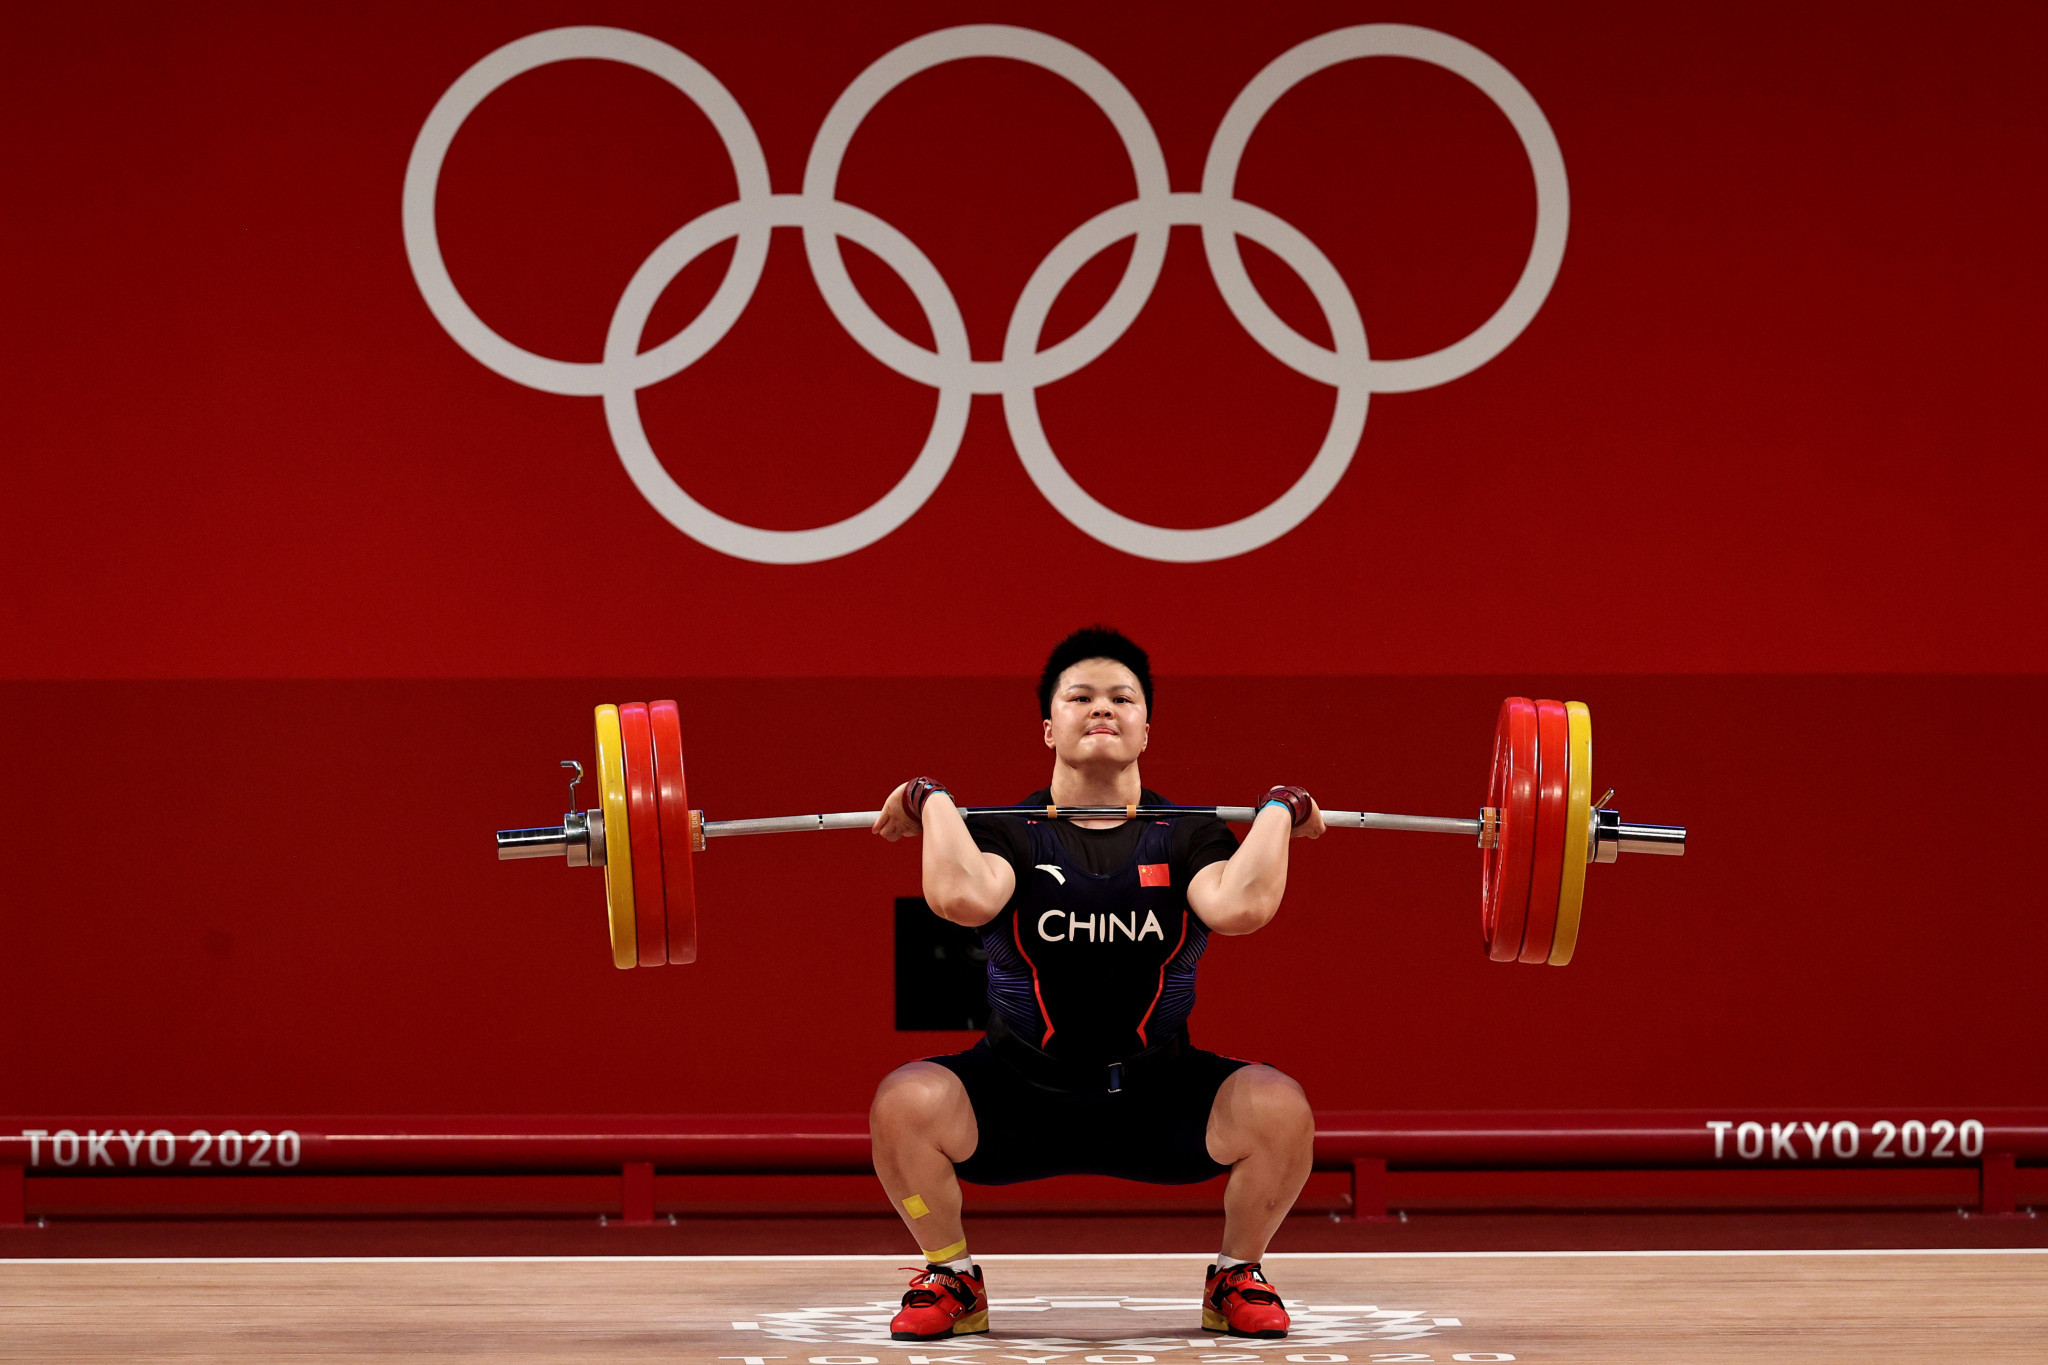 Wang Zhouyu is in China's full complement of 20 athletes ©Getty Images